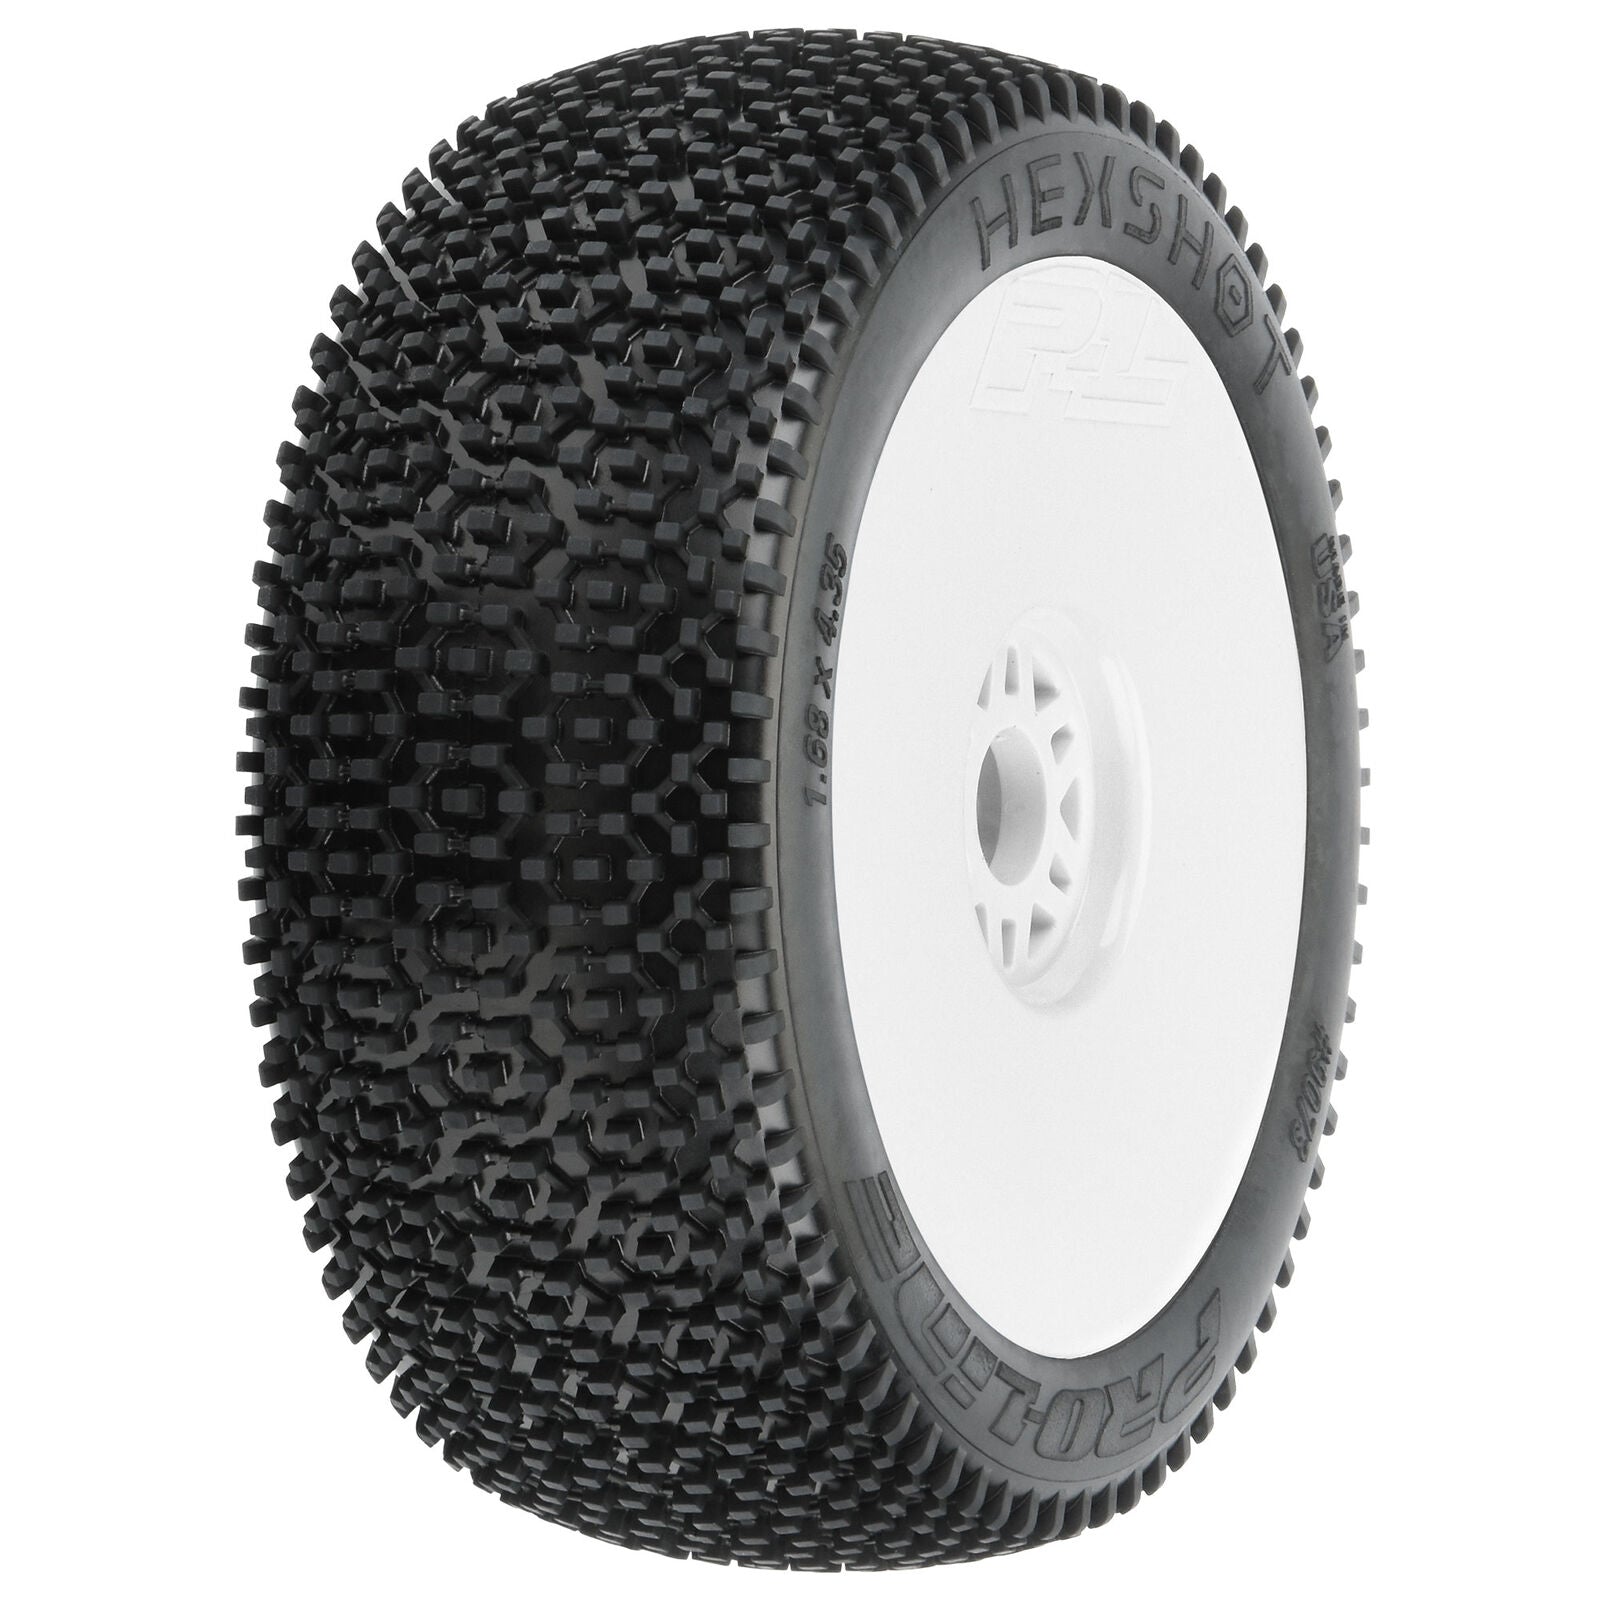 PROLINE 9073-233 1/8 Hex Shot S3 Front/Rear Buggy Tires Mounted 17mm White (2)